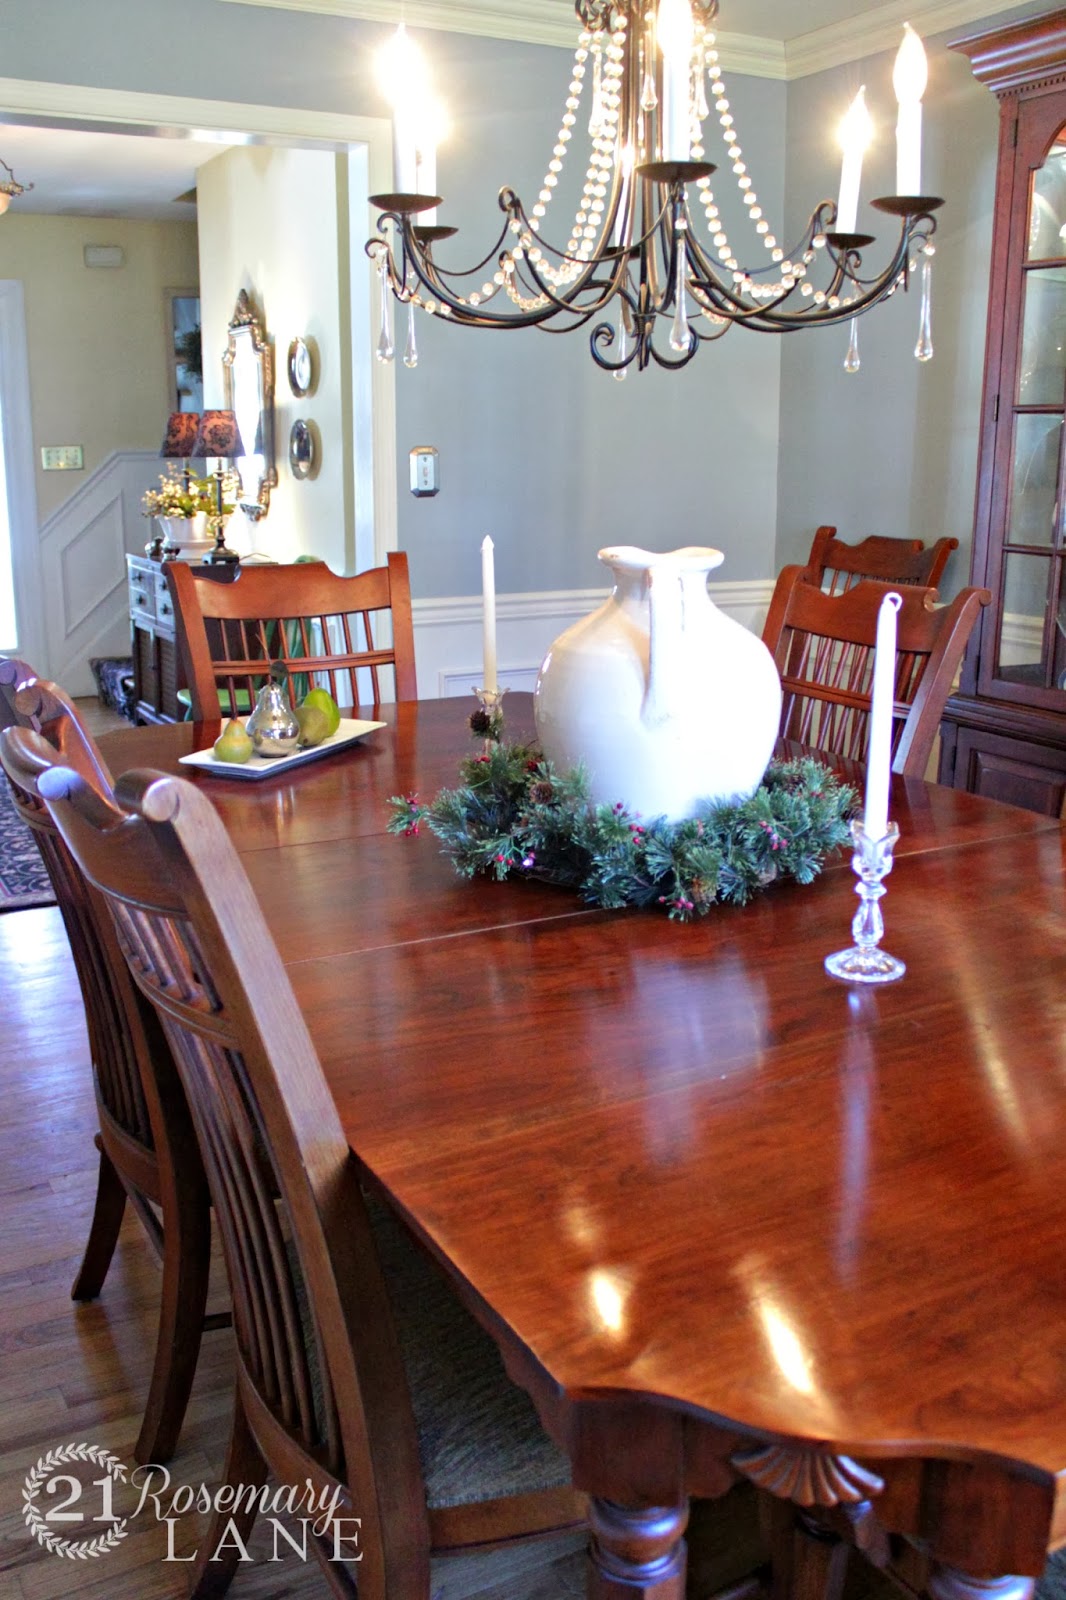 21 Rosemary Lane: Another Peek in the Dining Room